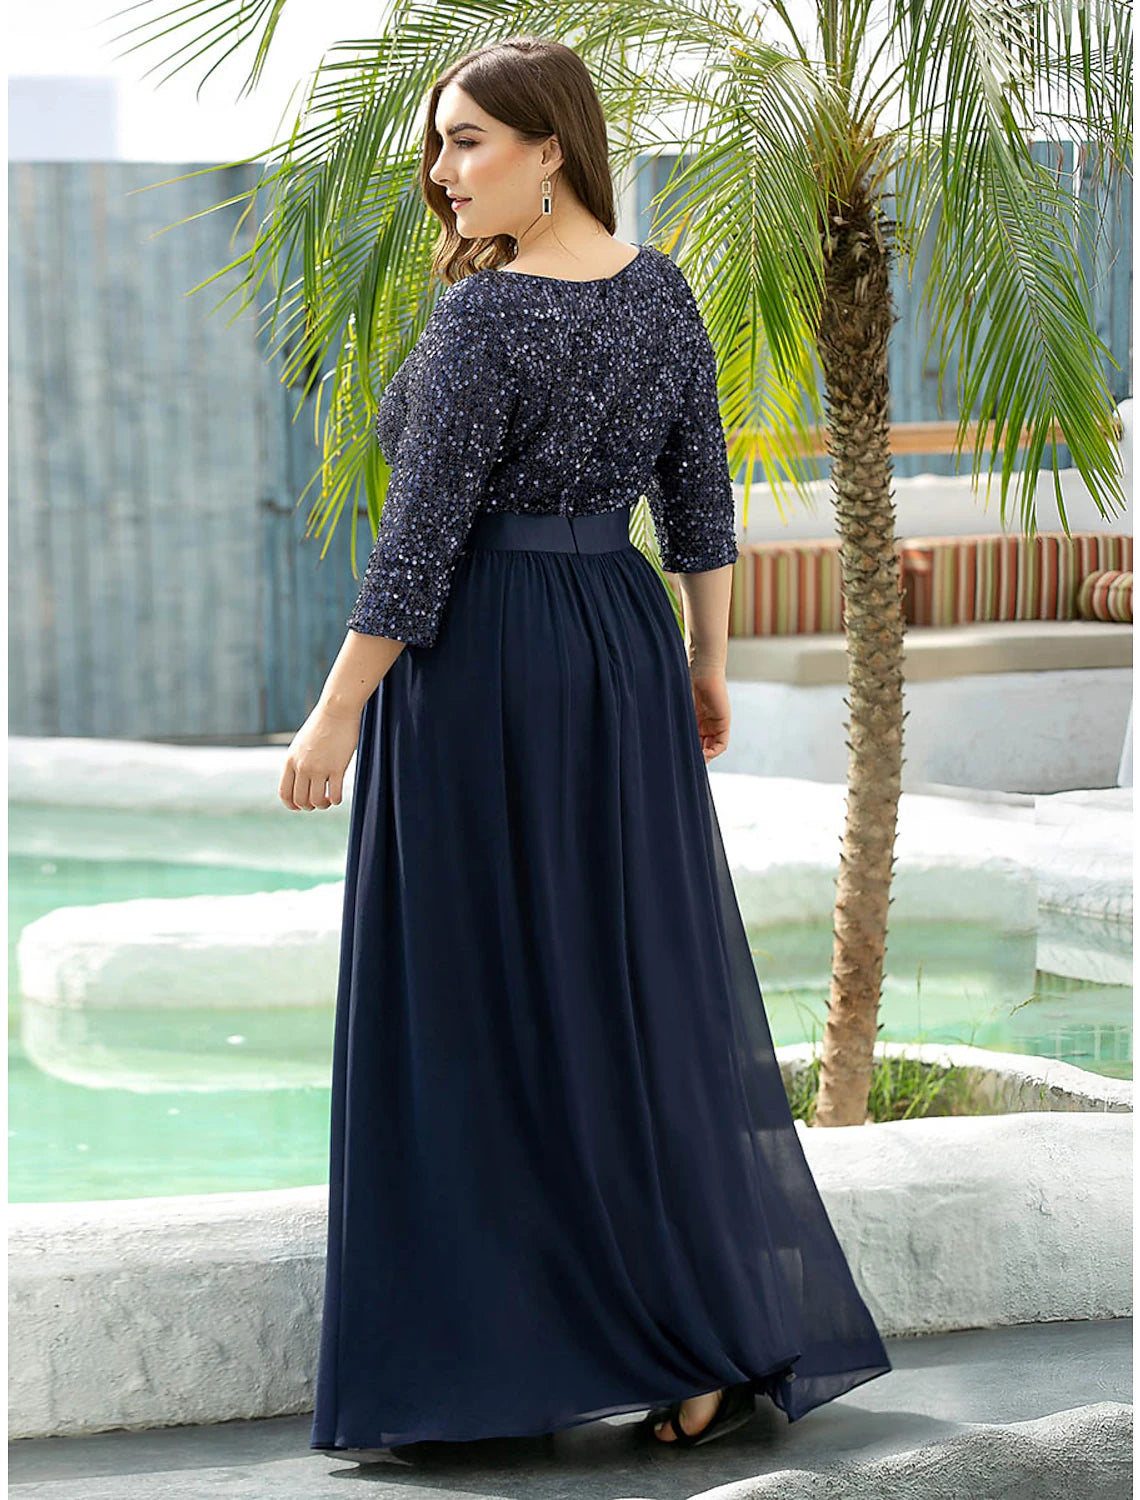 A-Line Mother of the Bride Dress Wedding Guest Plus Size Elegant Jewel Neck Floor Length Tulle Sequined 3/4 Length Sleeve